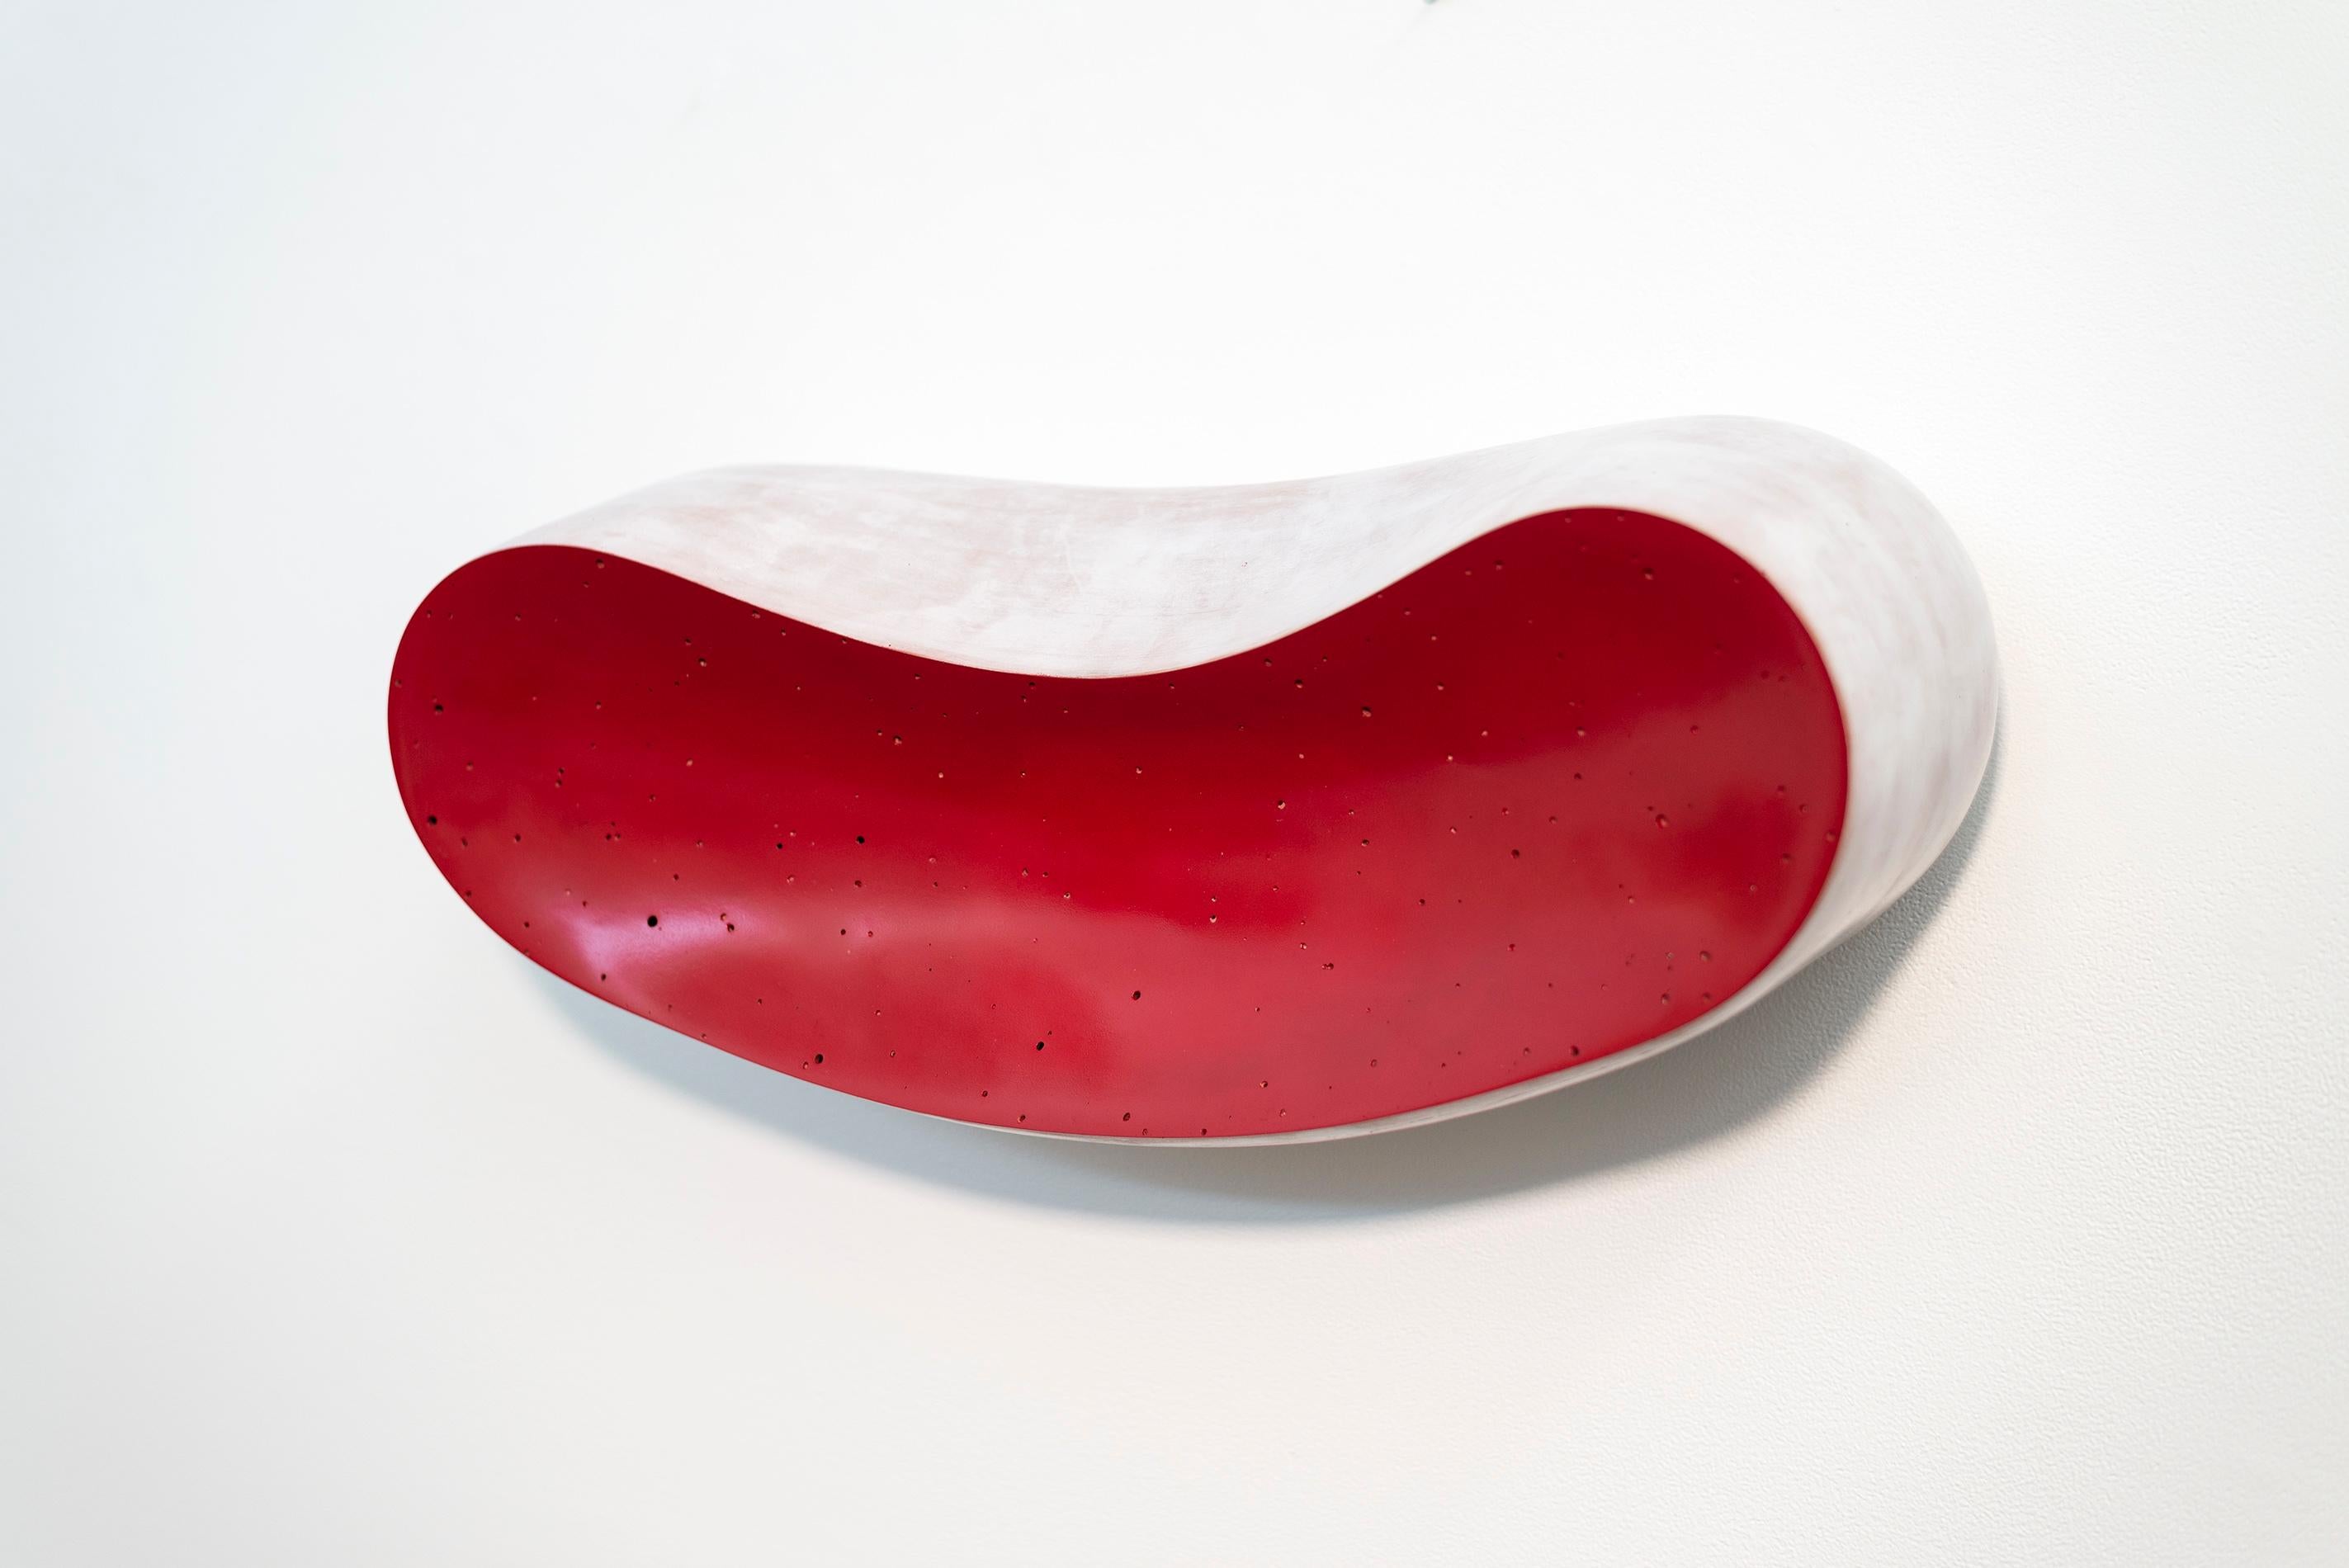 It is a striking piece. Steven Heinemann’s wall mounted ceramic sculpture has a bold fluid organic form and equally bold colour—deep red. Called “La Bouche” which means mouth in French, the shape of this ceramic piece resembles a mouth, wrapped in